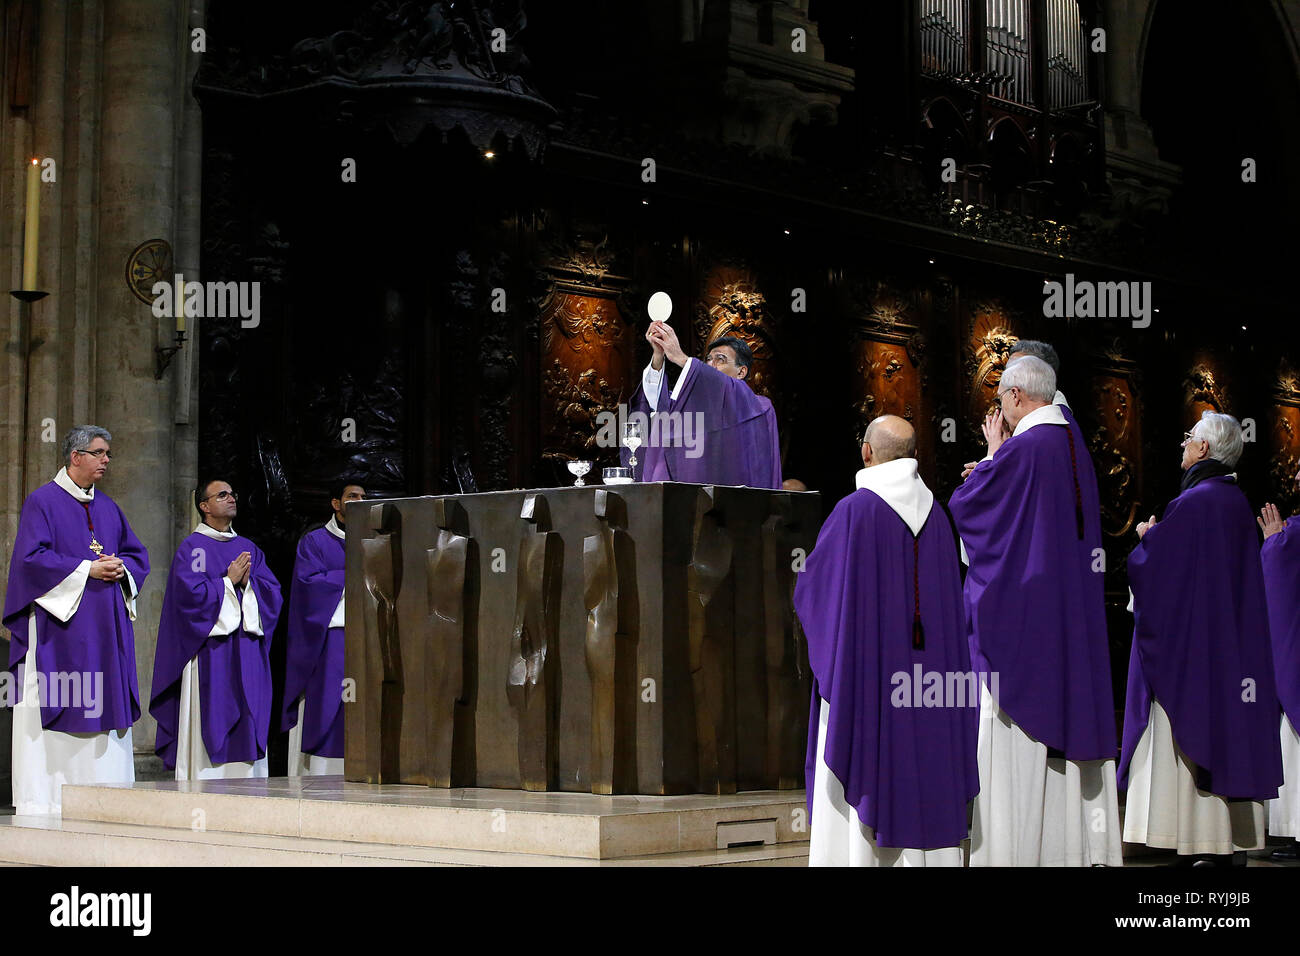 Ash wednesday celebration at Notre Dame cathedral, Paris, France. Stock Photo